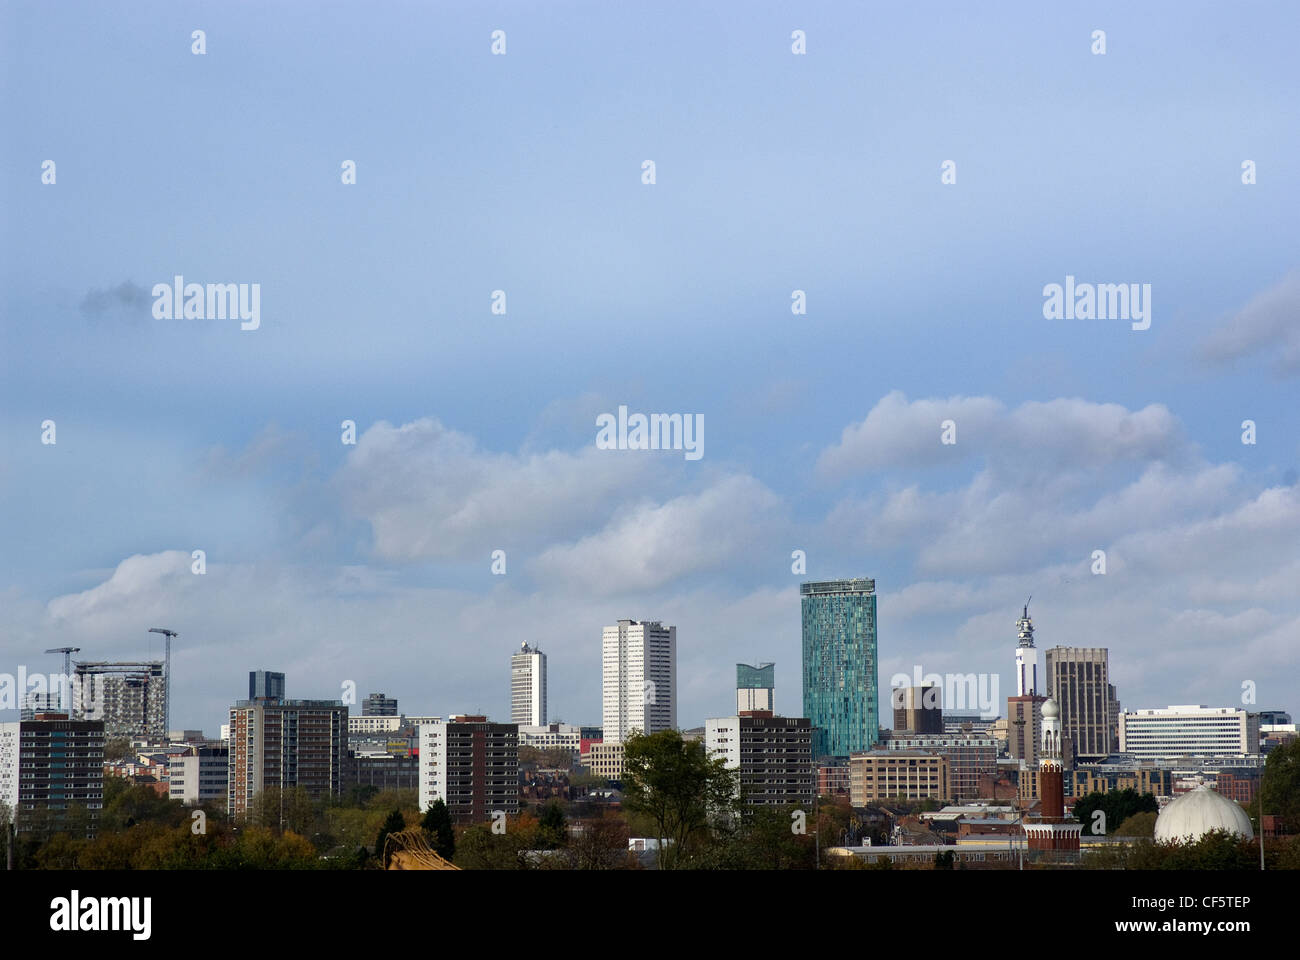 The Birmingham city skyline, 'often referred to as the second city of the United Kingdom'. Stock Photo